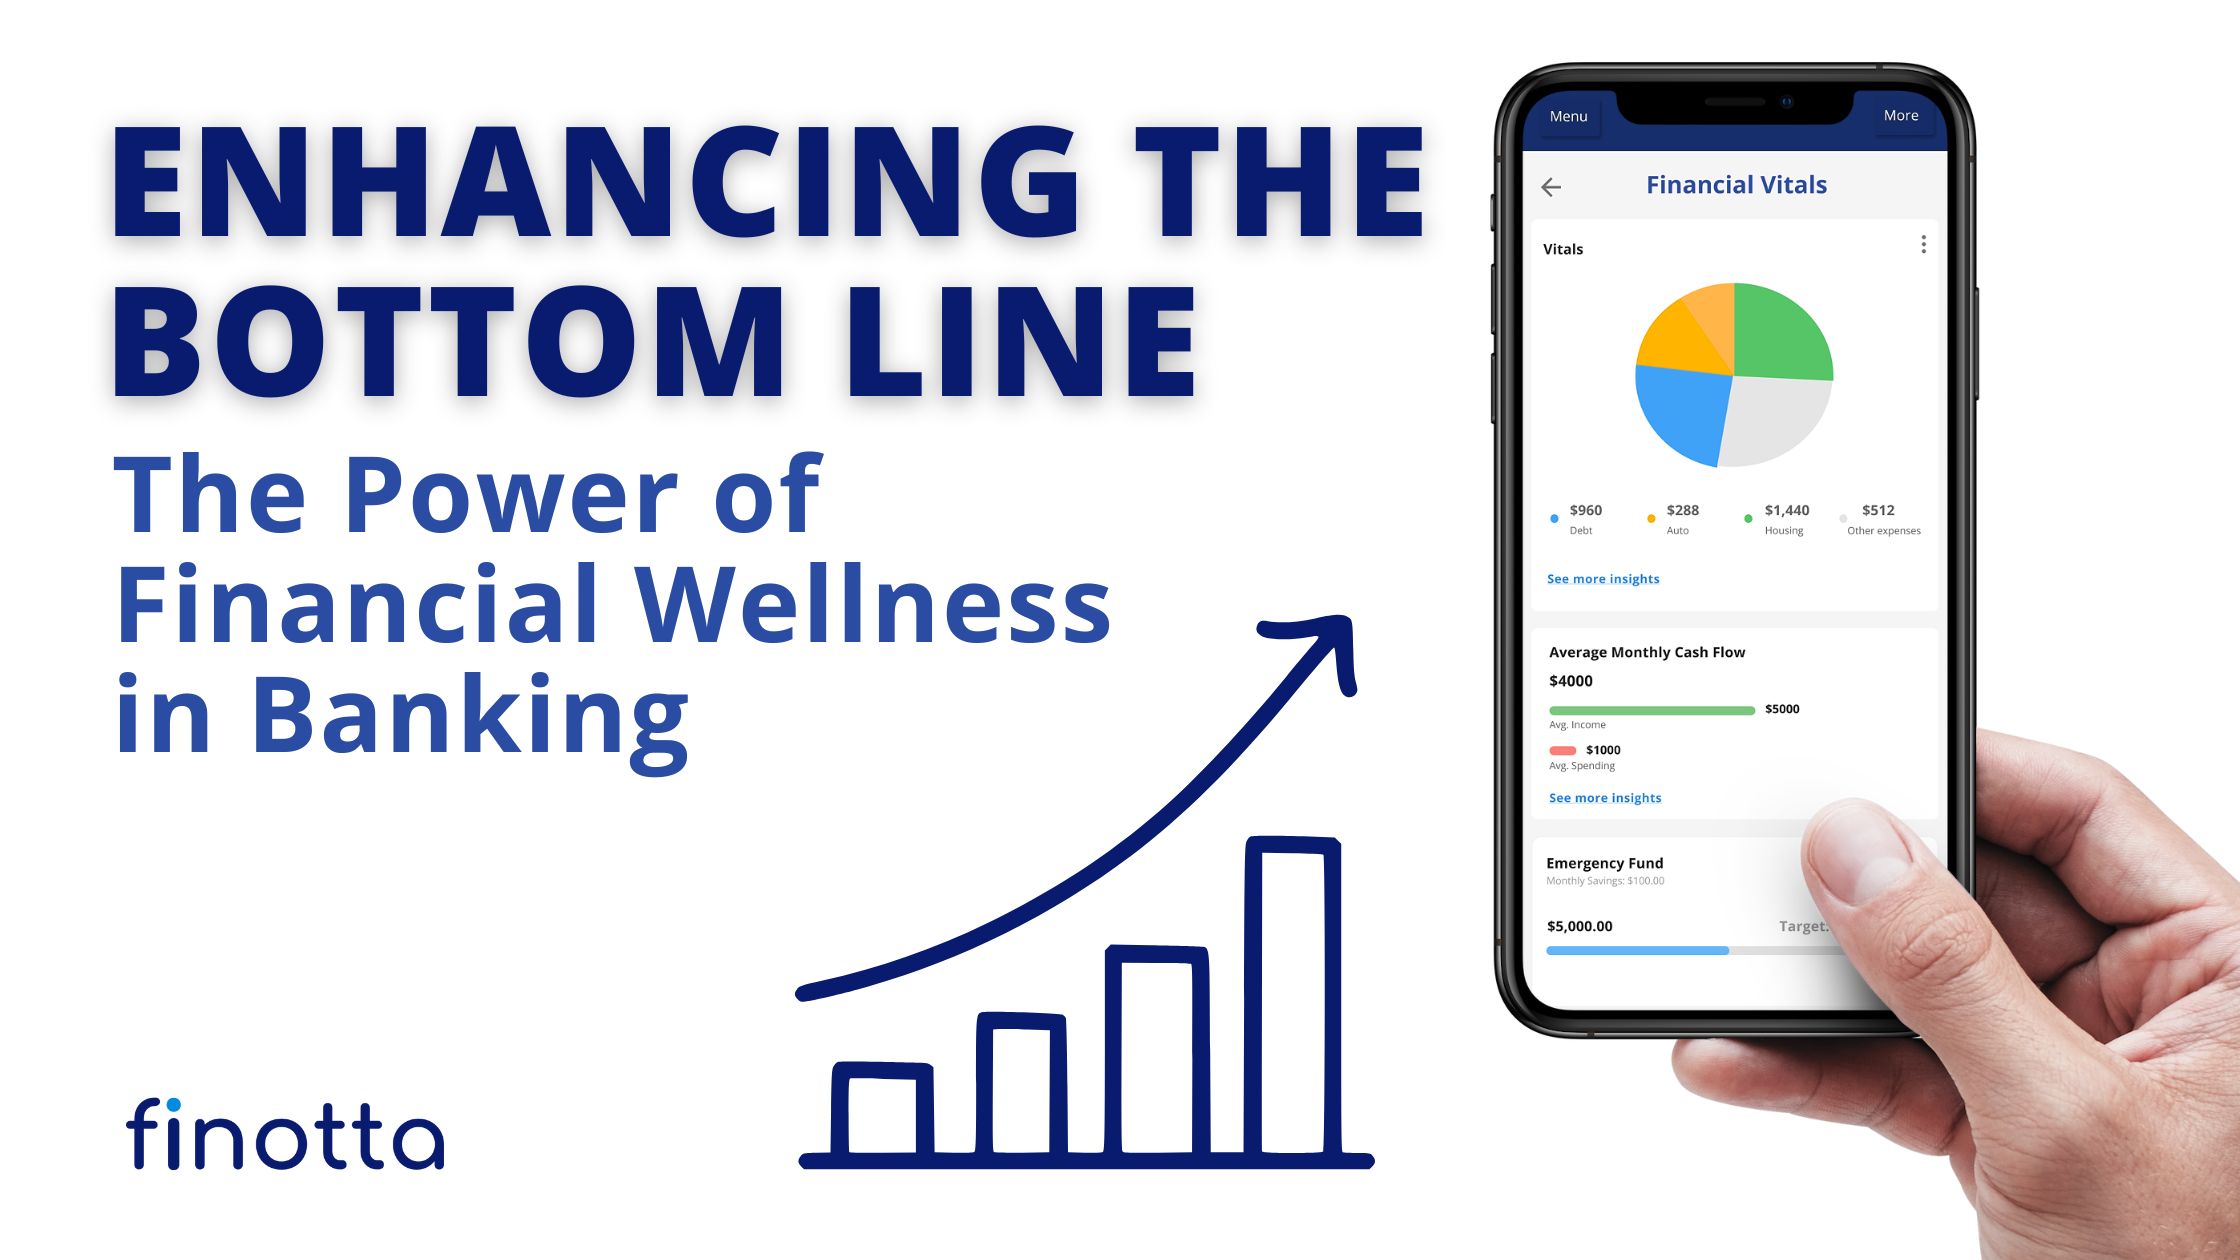 Enhancing the Bottom Line: The Power of Financial Wellness in Banking